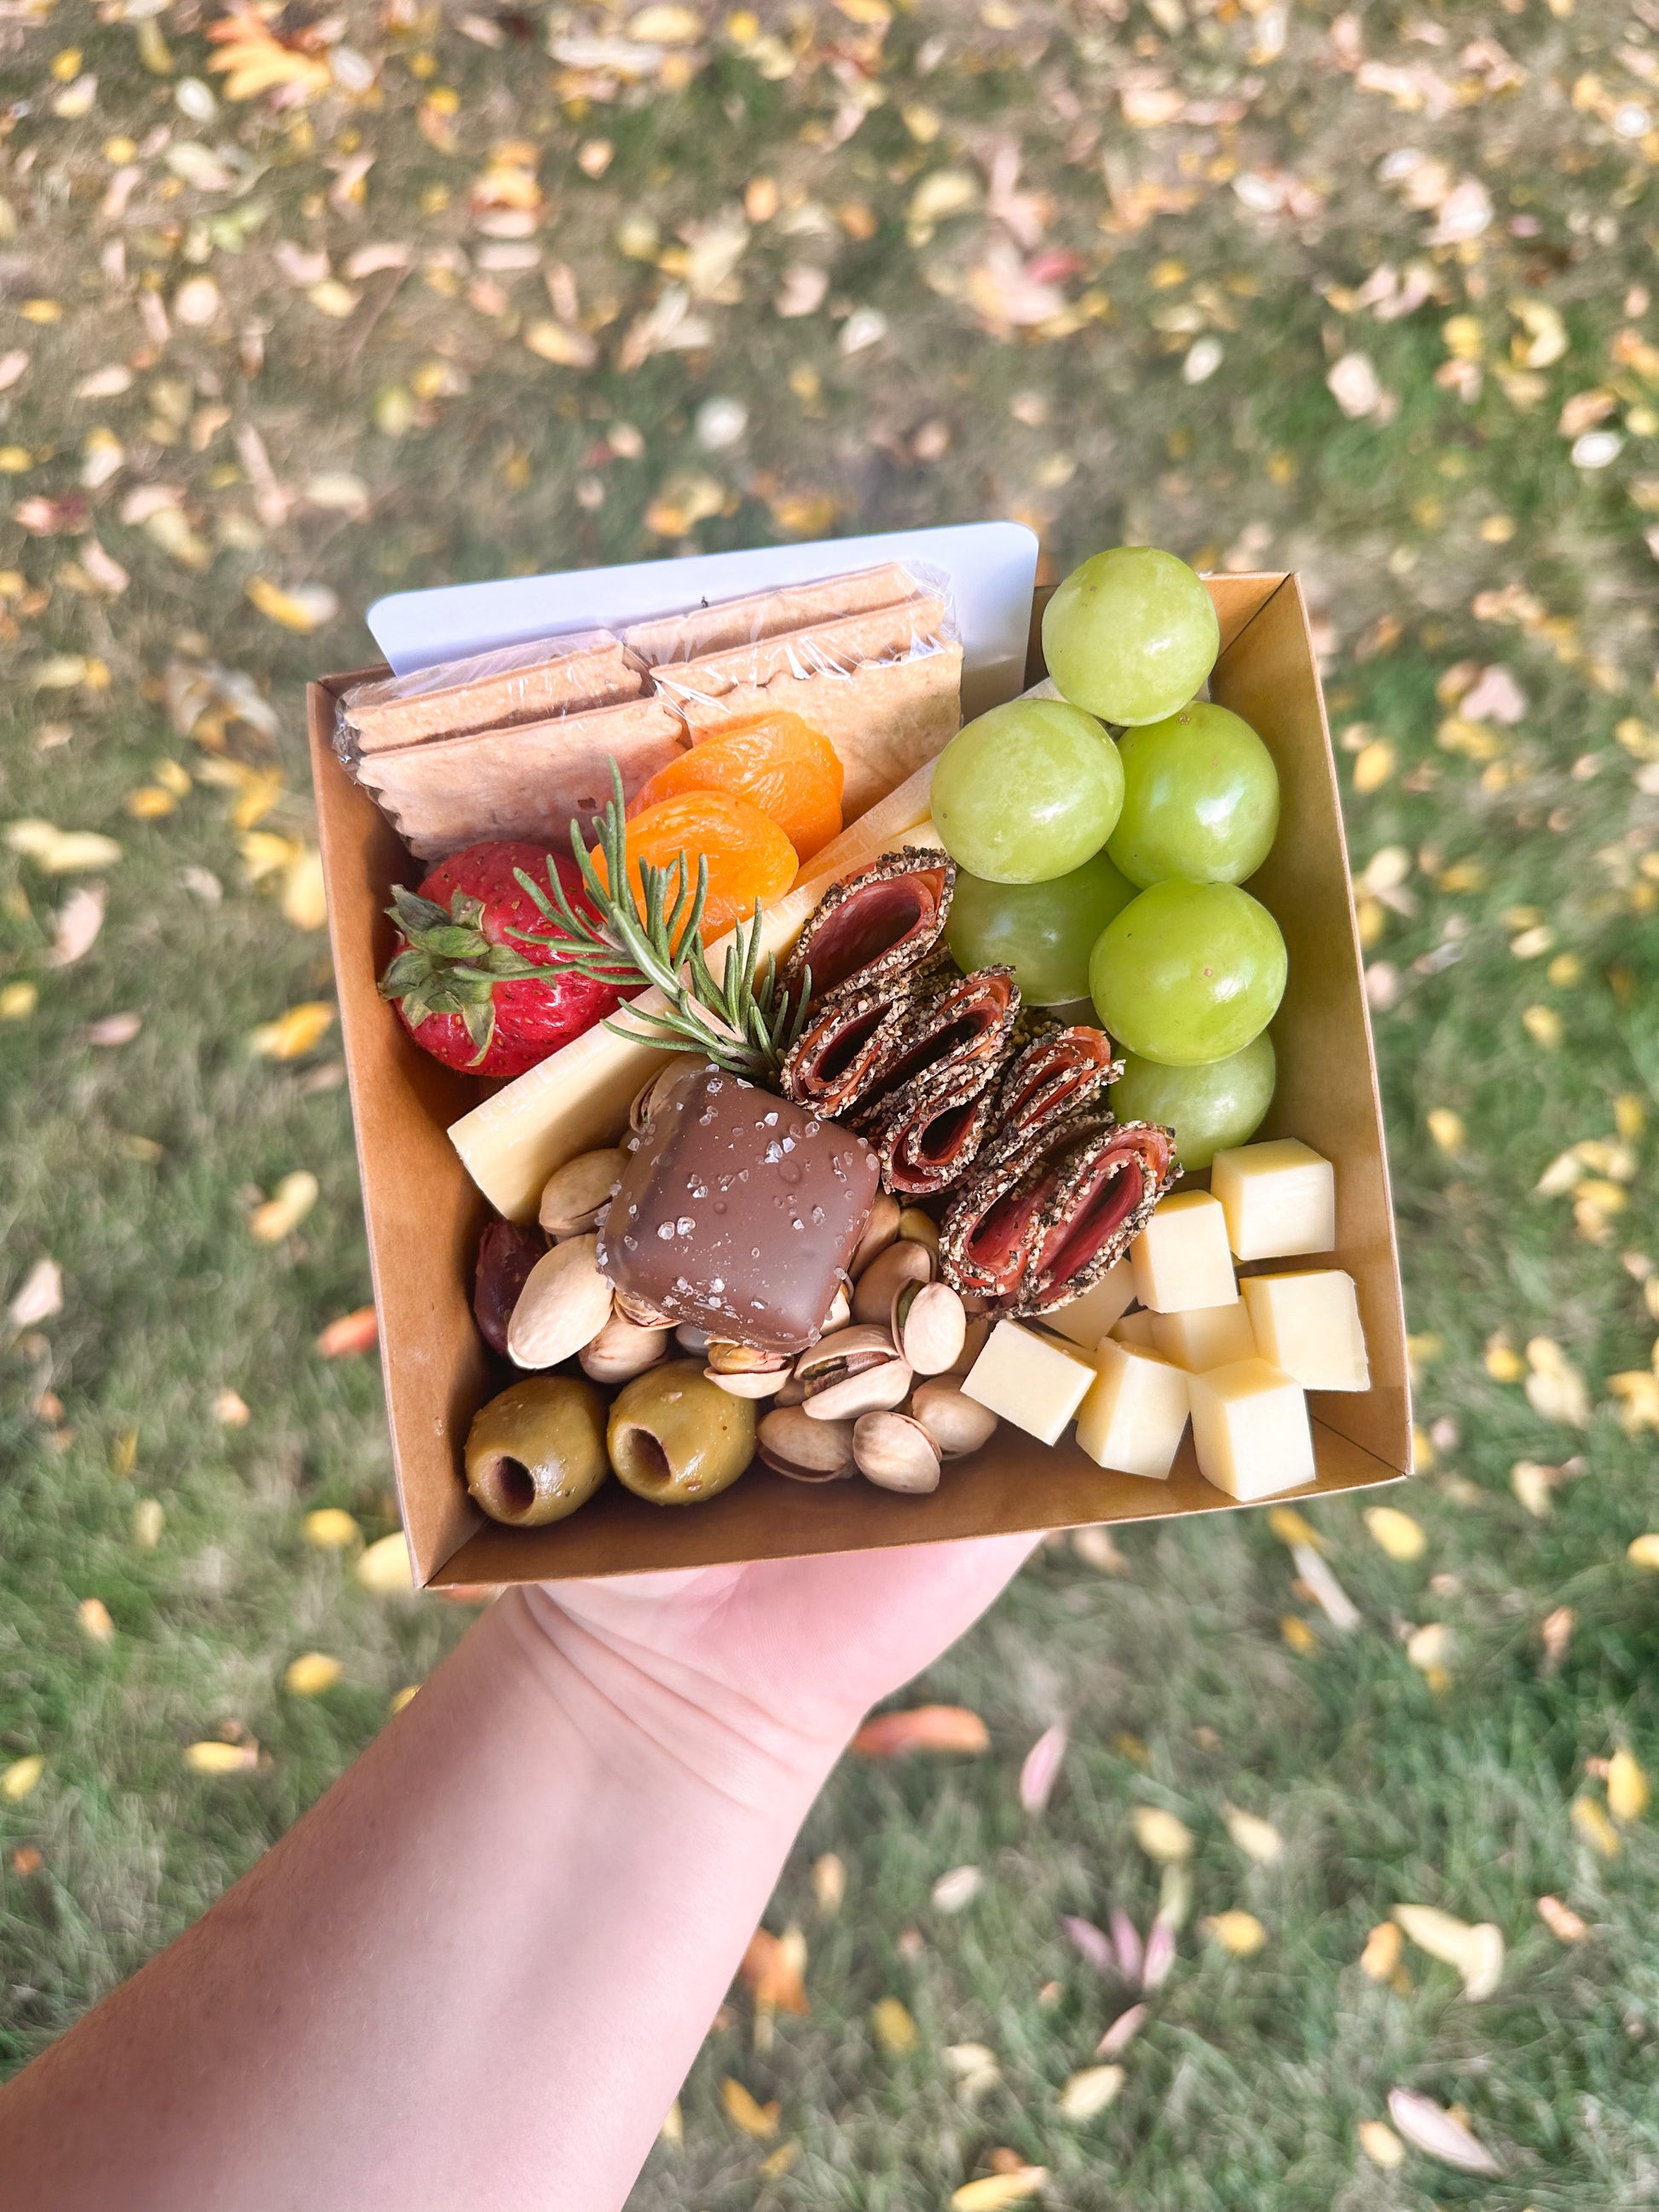 Adult lunchable: South Dakota grocery store selling special steak pack